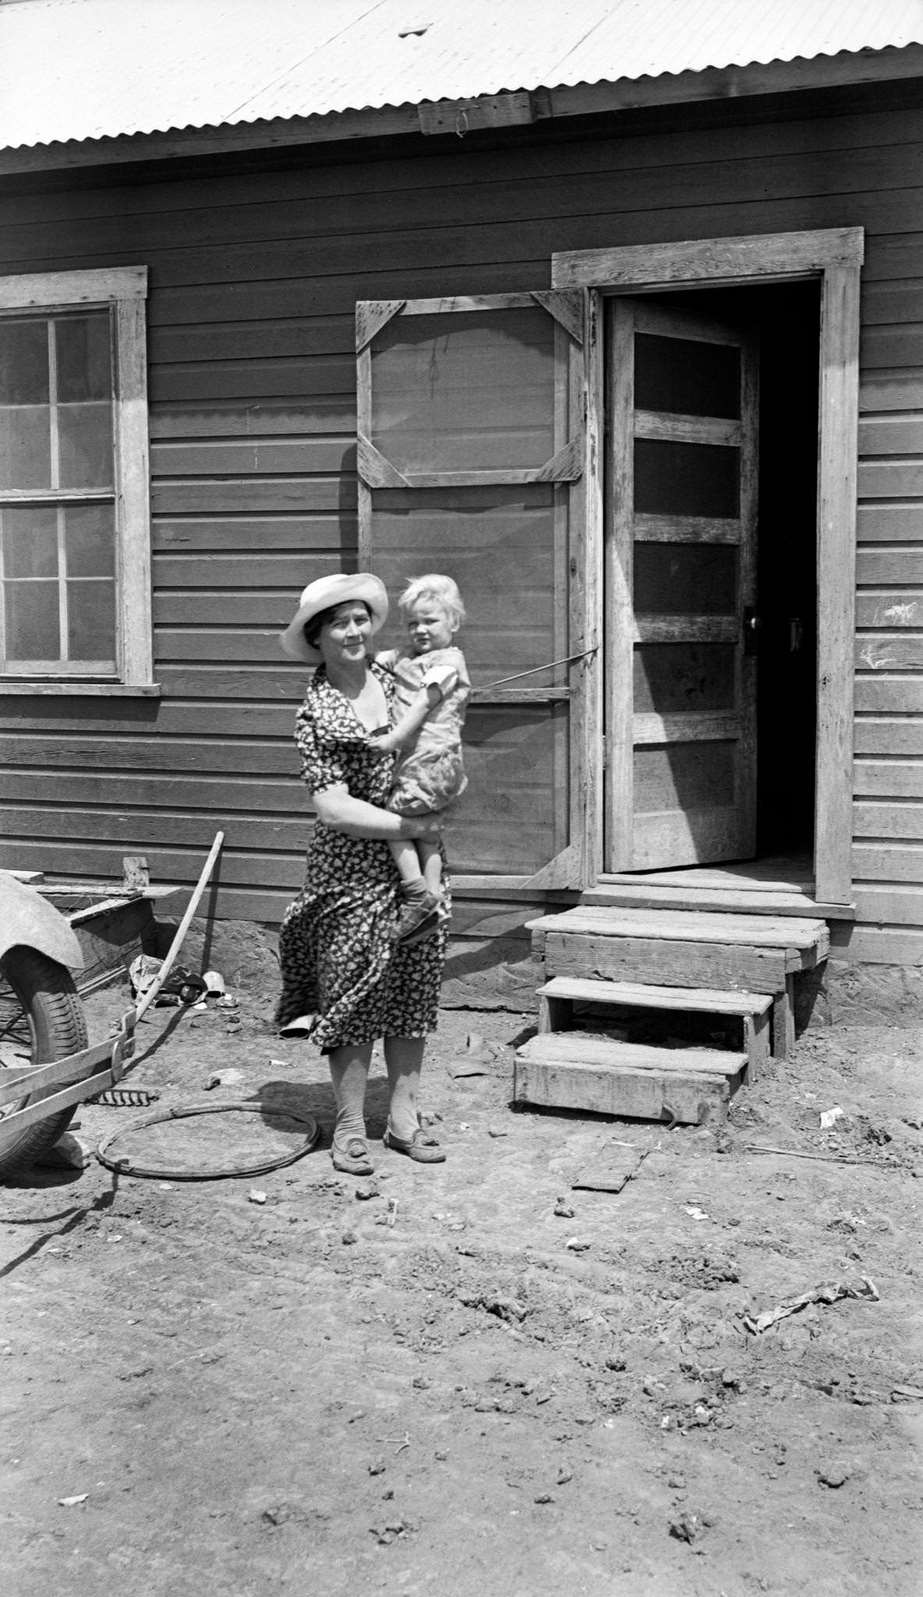 Typical Teutonic Farm Wife and Child, Client for Resettlement, Mills, New Mexico, USA, Dorothea Lange, Farm Security Administration, May 1935